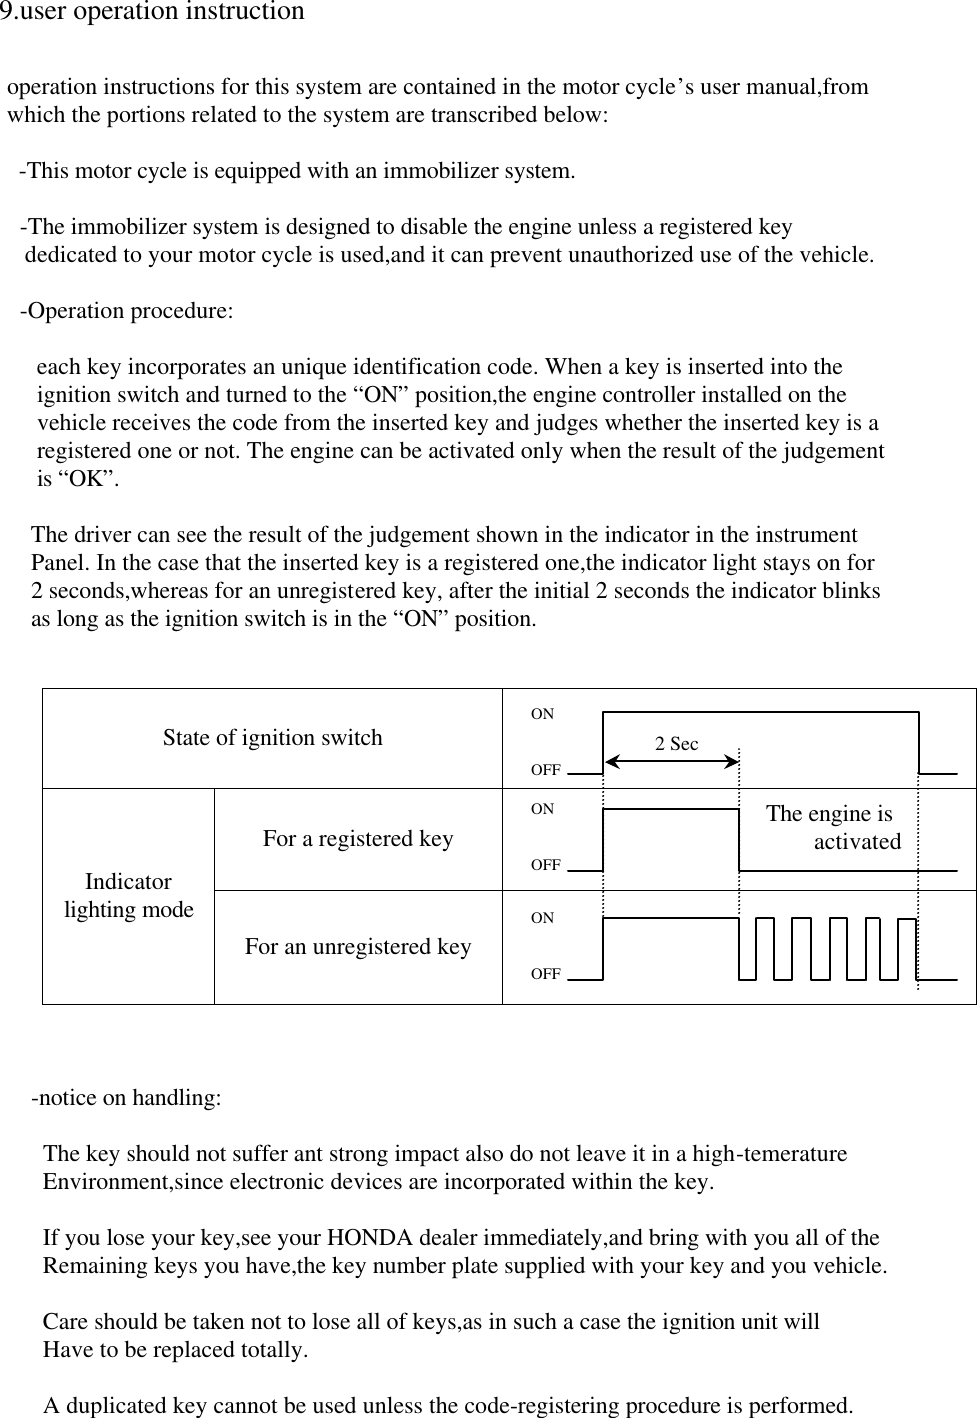  9.user operation instruction     operation instructions for this system are contained in the motor cycle’s user manual,from   which the portions related to the system are transcribed below:      -This motor cycle is equipped with an immobilizer system.    -The immobilizer system is designed to disable the engine unless a registered key      dedicated to your motor cycle is used,and it can prevent unauthorized use of the vehicle.    -Operation procedure:         each key incorporates an unique identification code. When a key is inserted into the            ignition switch and turned to the “ON” position,the engine controller installed on the            vehicle receives the code from the inserted key and judges whether the inserted key is a            registered one or not. The engine can be activated only when the result of the judgement            is “OK”.            The driver can see the result of the judgement shown in the indicator in the instrument           Panel. In the case that the inserted key is a registered one,the indicator light stays on for           2 seconds,whereas for an unregistered key, after the initial 2 seconds the indicator blinks           as long as the ignition switch is in the “ON” position.   State of ignition switch  For a registered key  Indicator lighting mode For an unregistered key               -notice on handling:              The key should not suffer ant strong impact also do not leave it in a high-temerature             Environment,since electronic devices are incorporated within the key.              If you lose your key,see your HONDA dealer immediately,and bring with you all of the             Remaining keys you have,the key number plate supplied with your key and you vehicle.              Care should be taken not to lose all of keys,as in such a case the ignition unit will             Have to be replaced totally.              A duplicated key cannot be used unless the code-registering procedure is performed.    ON   OFF 2 Sec The engine is         activated ON   OFF ON   OFF 